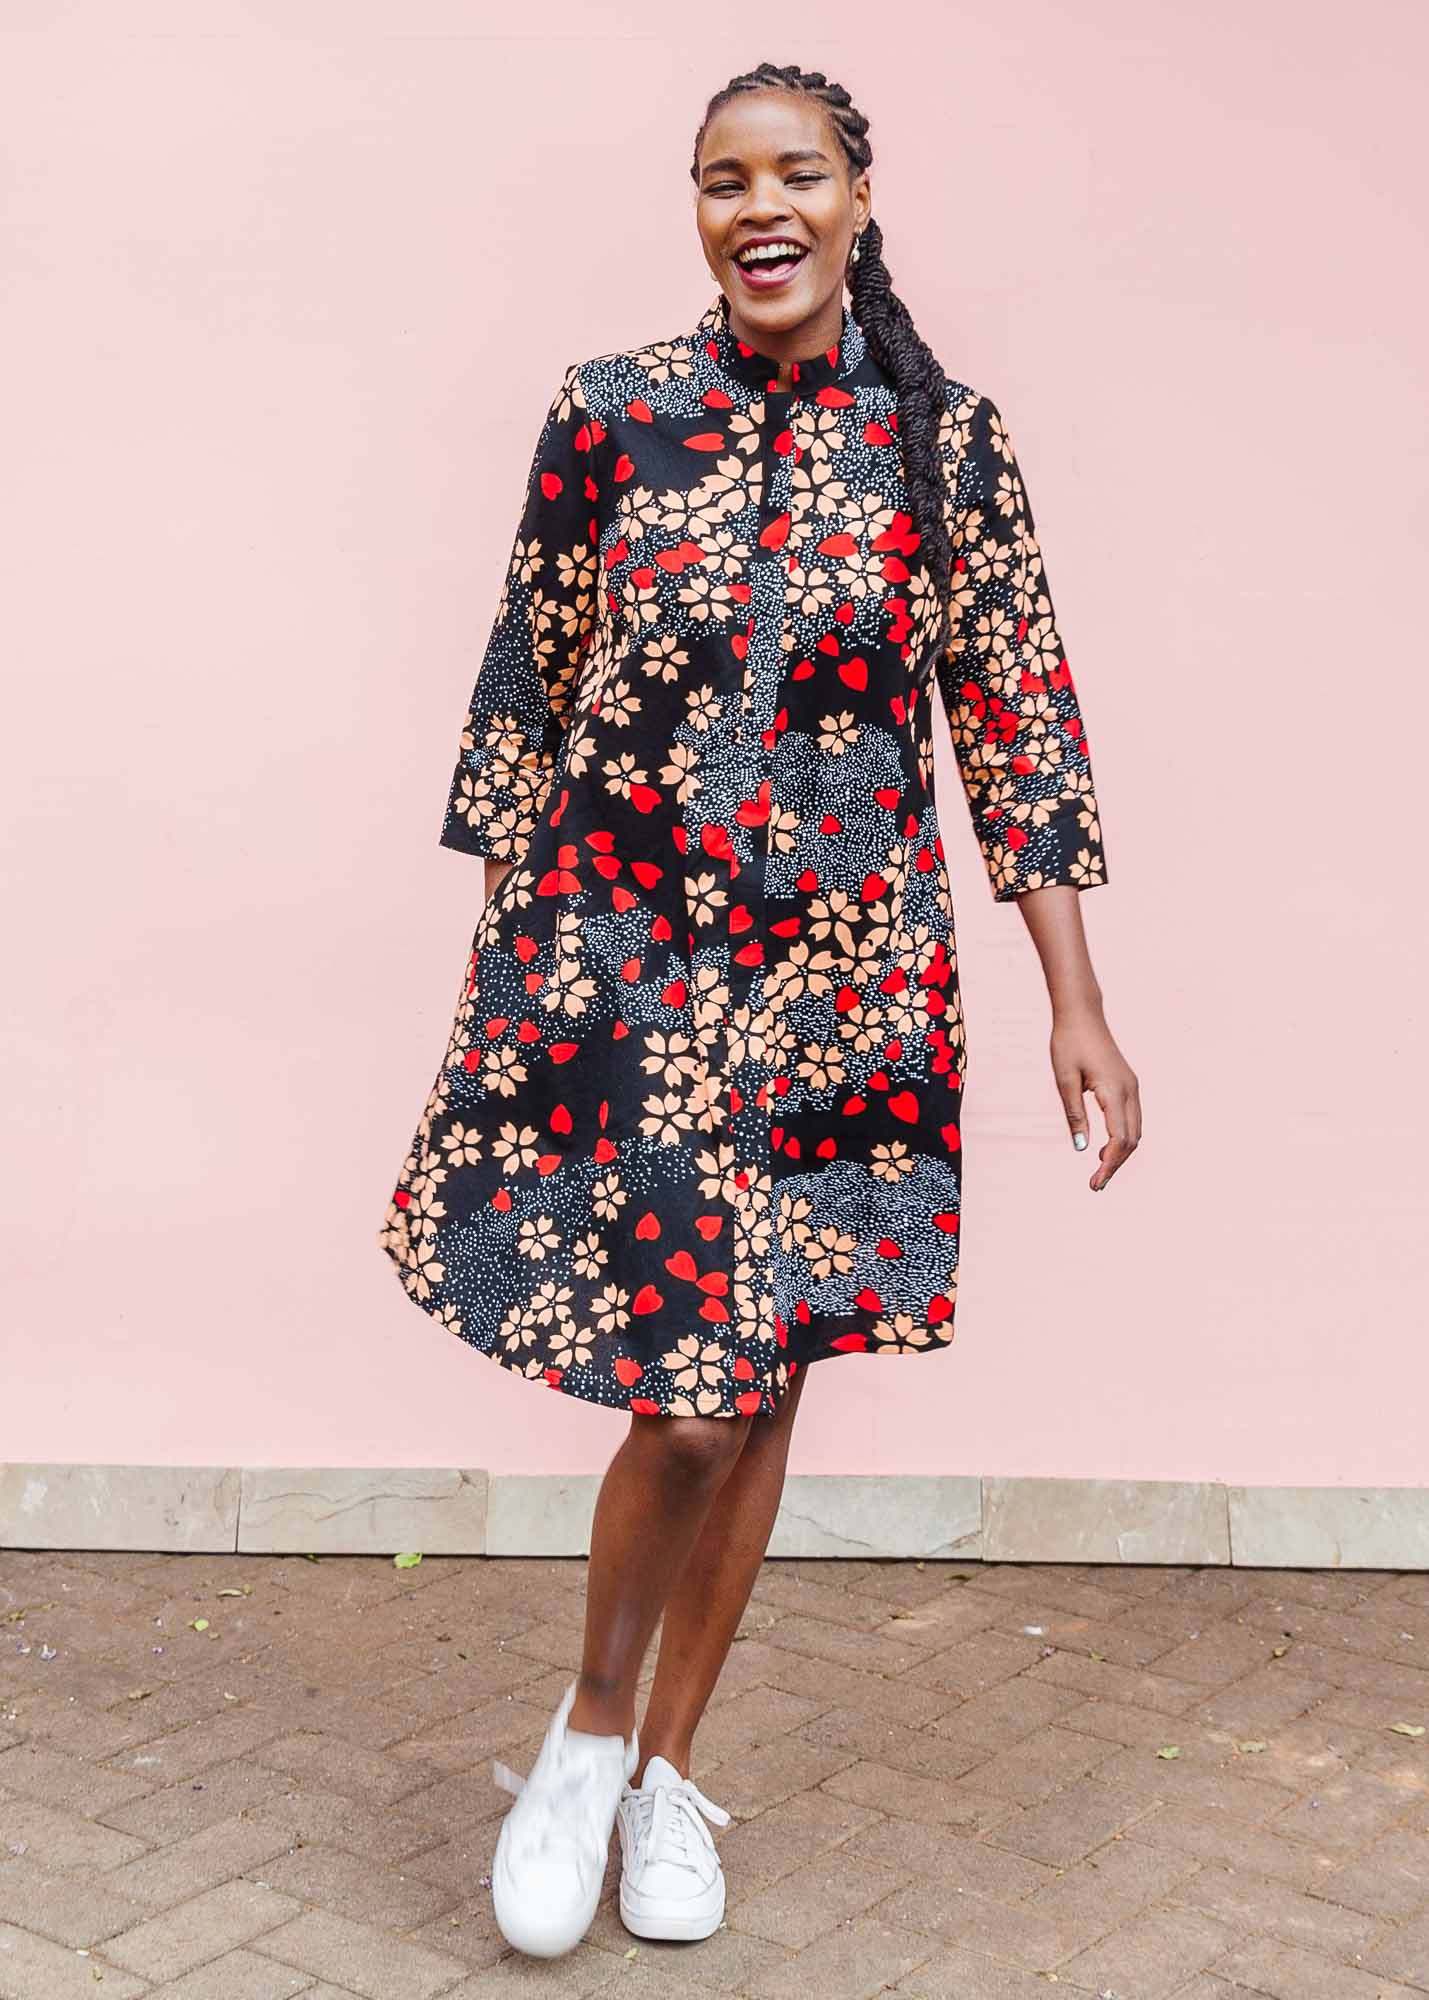 The model is wearing black dress with beige flowers and red hearts 